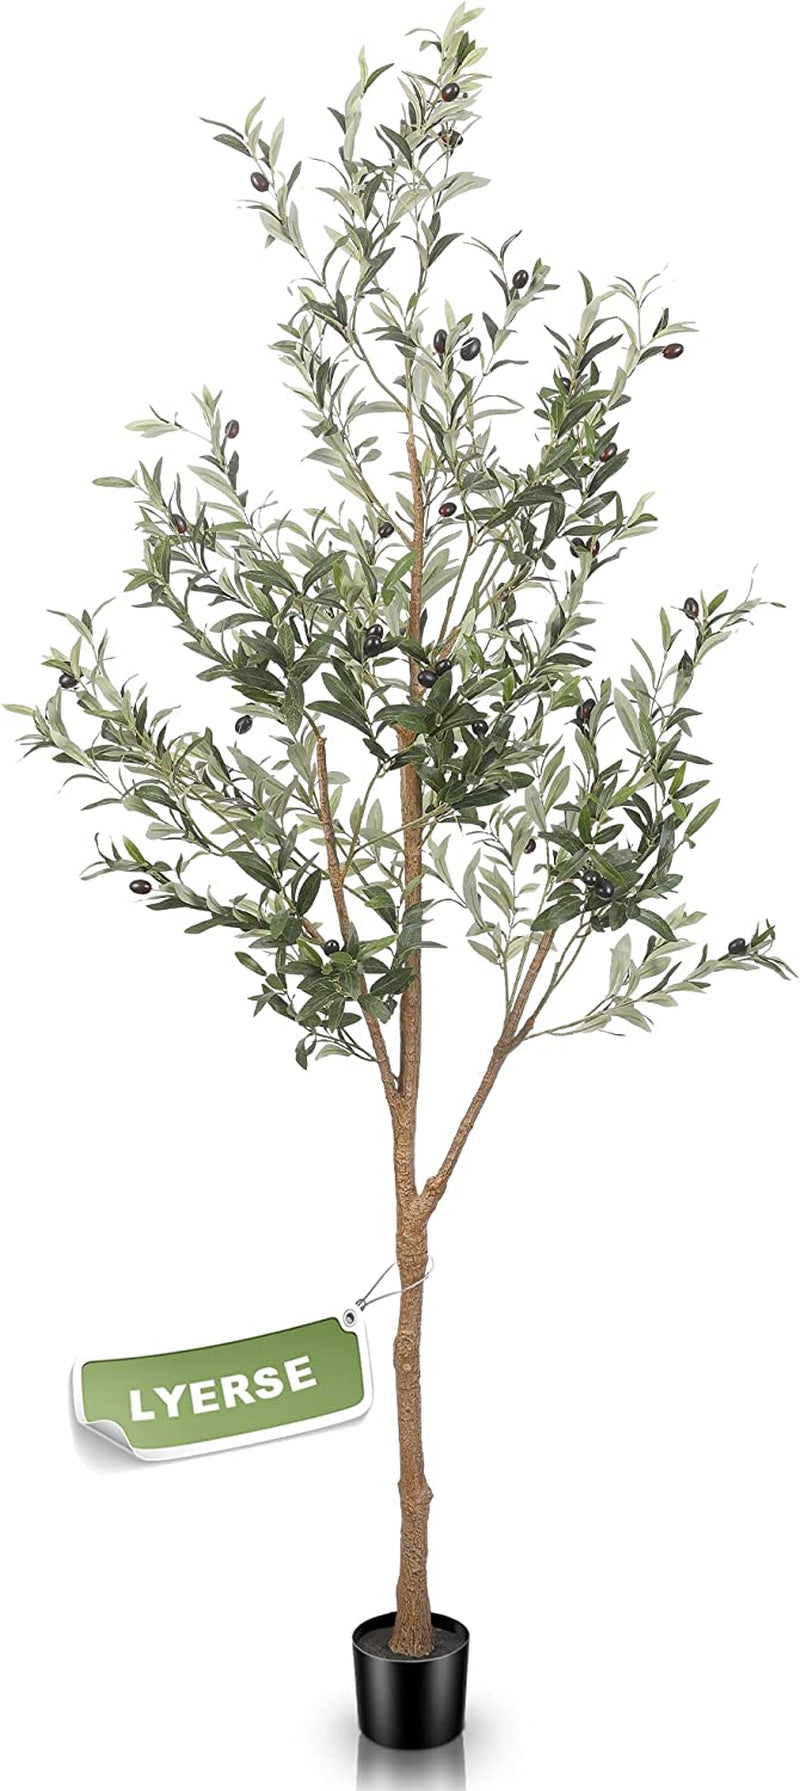 LYERSE Artificial Olive Tree, Tall 8 Feet Fake Potted Olive Silk Tree with Planter, Large Faux House Plants Decoration for Home Office Decor  LYERSE 6Ft  